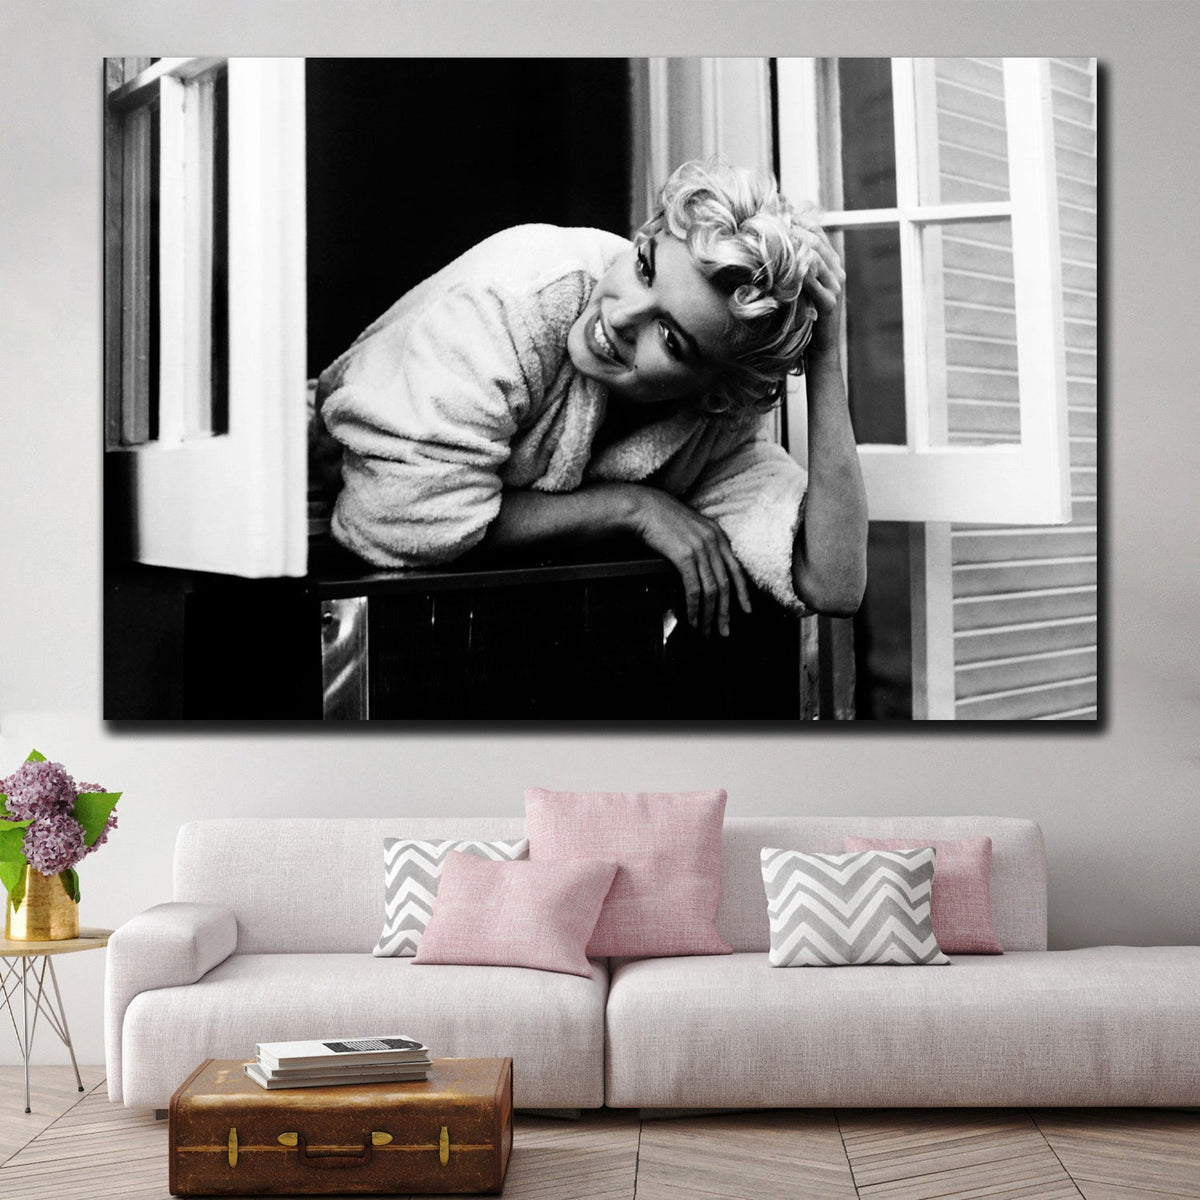 https://cdn.shopify.com/s/files/1/0387/9986/8044/products/MarilynMagicCanvasArtprintStretched-3.jpg